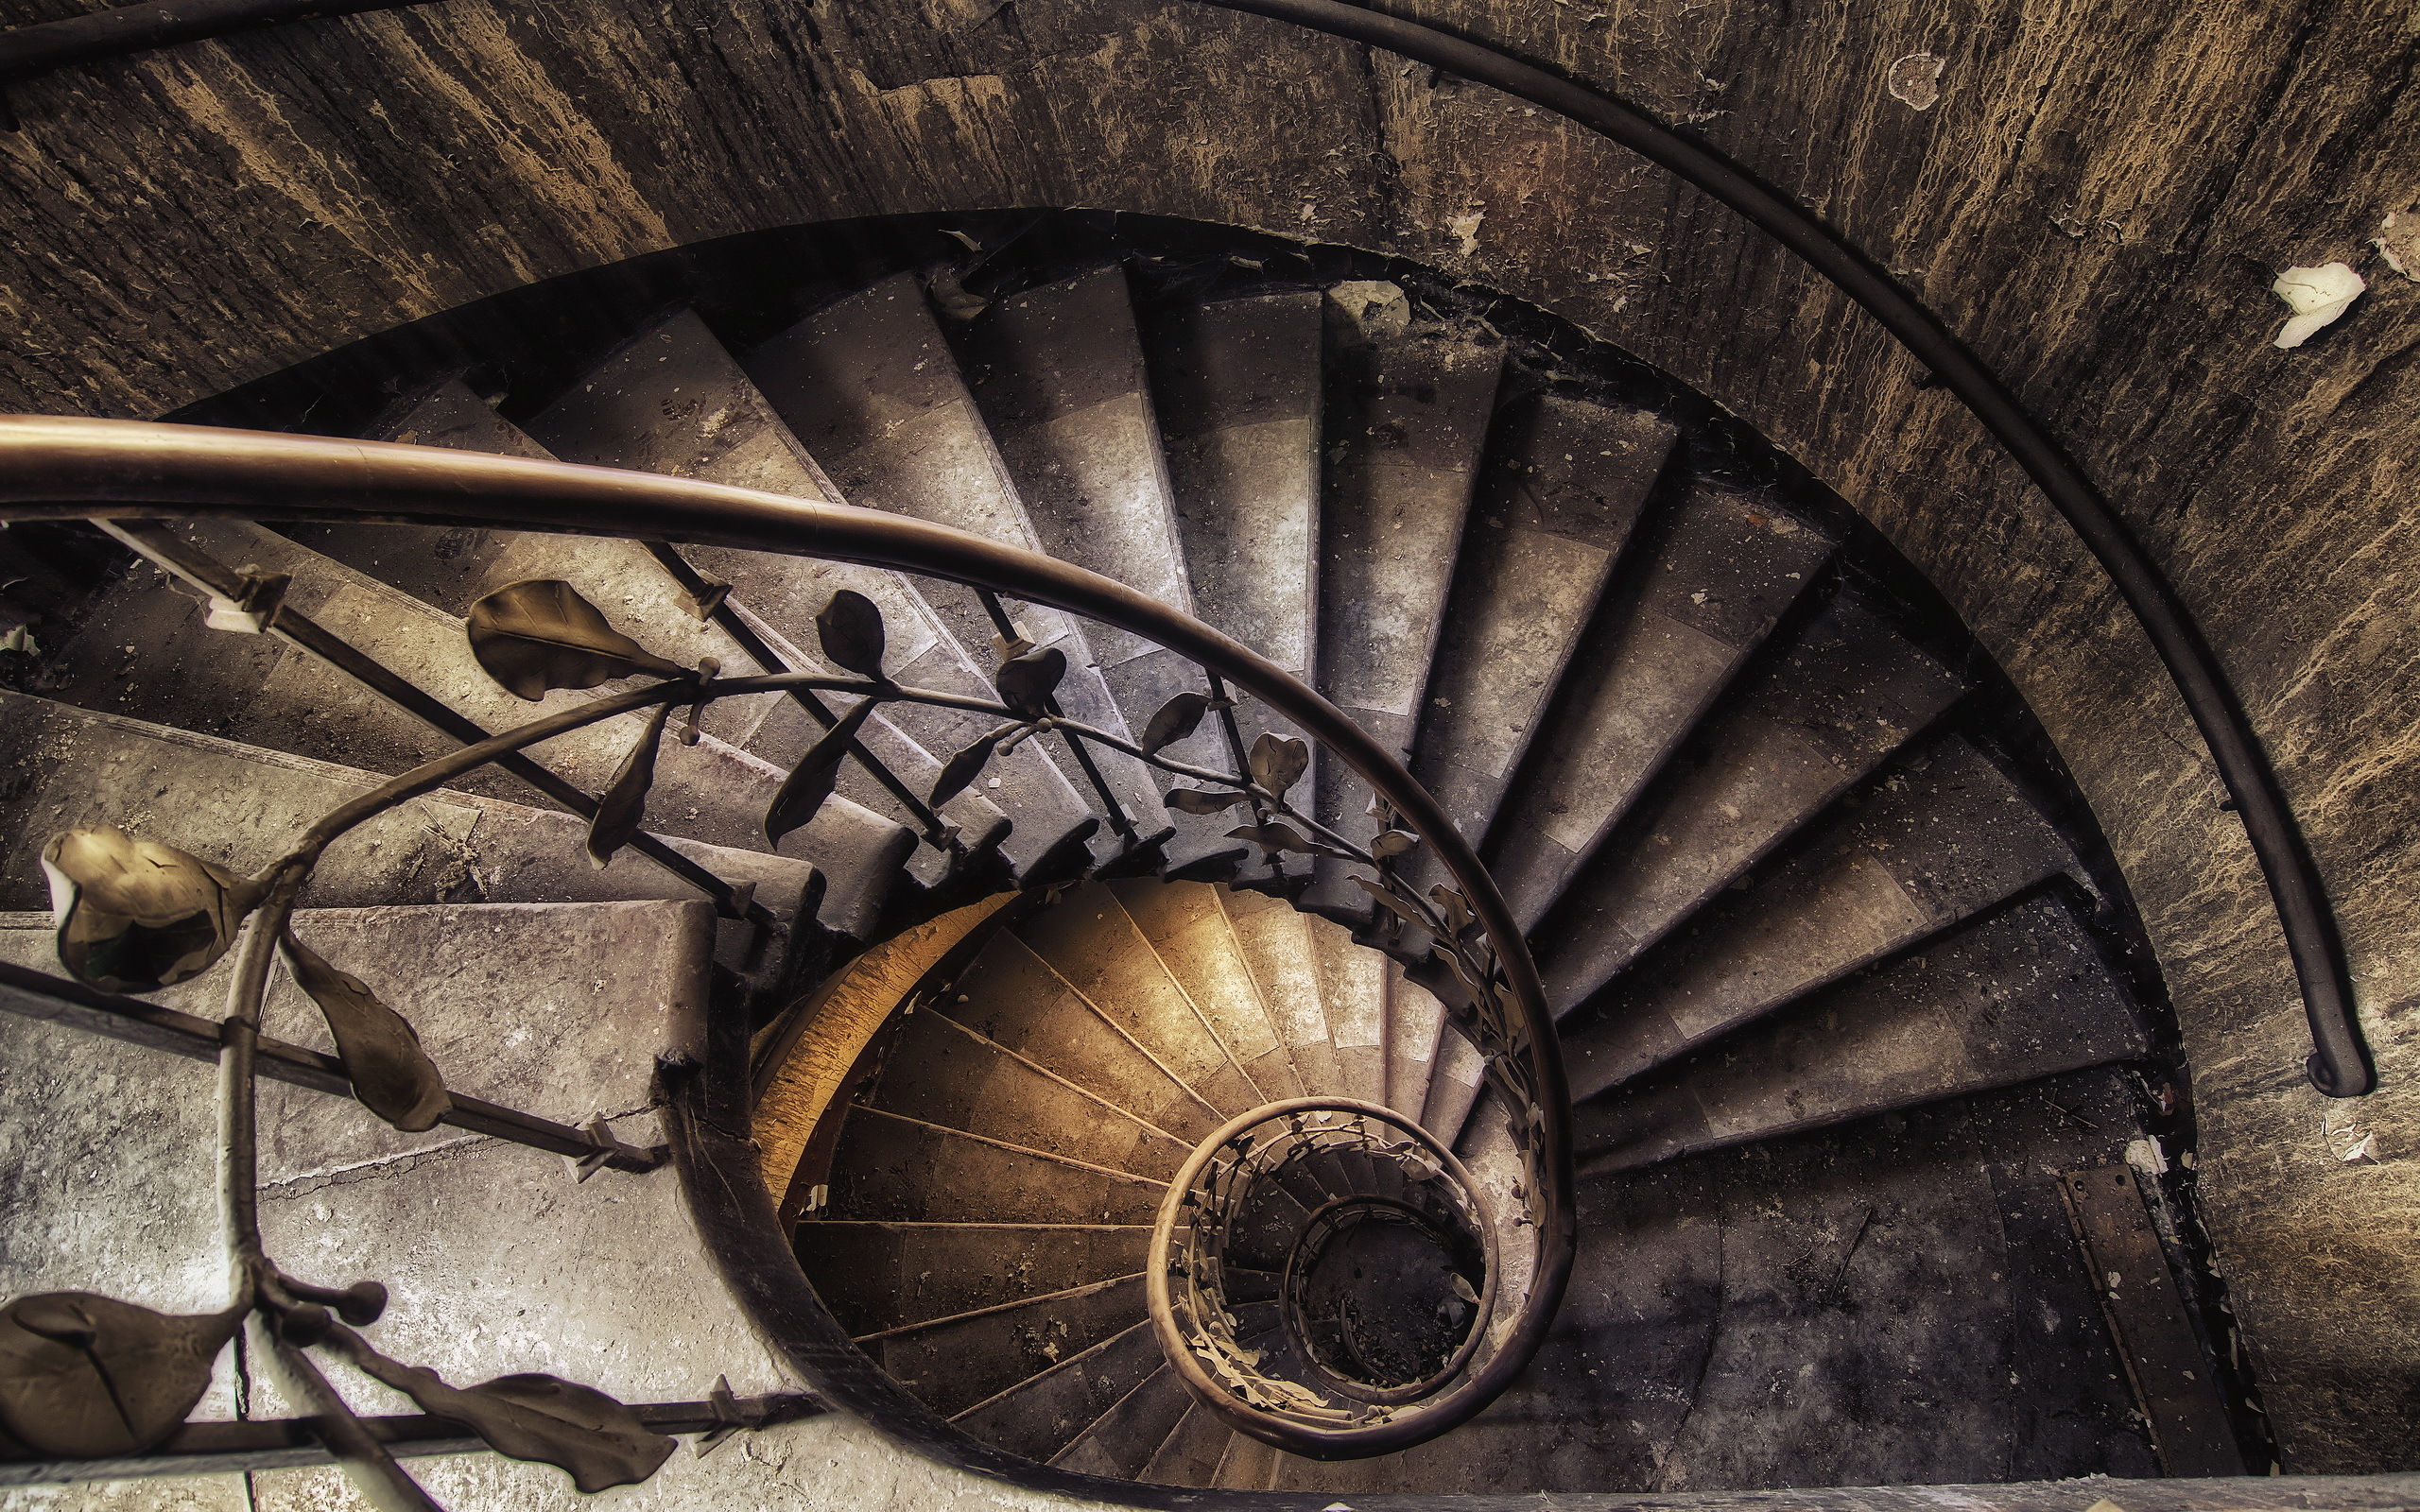 man made, stairs, spiral staircase